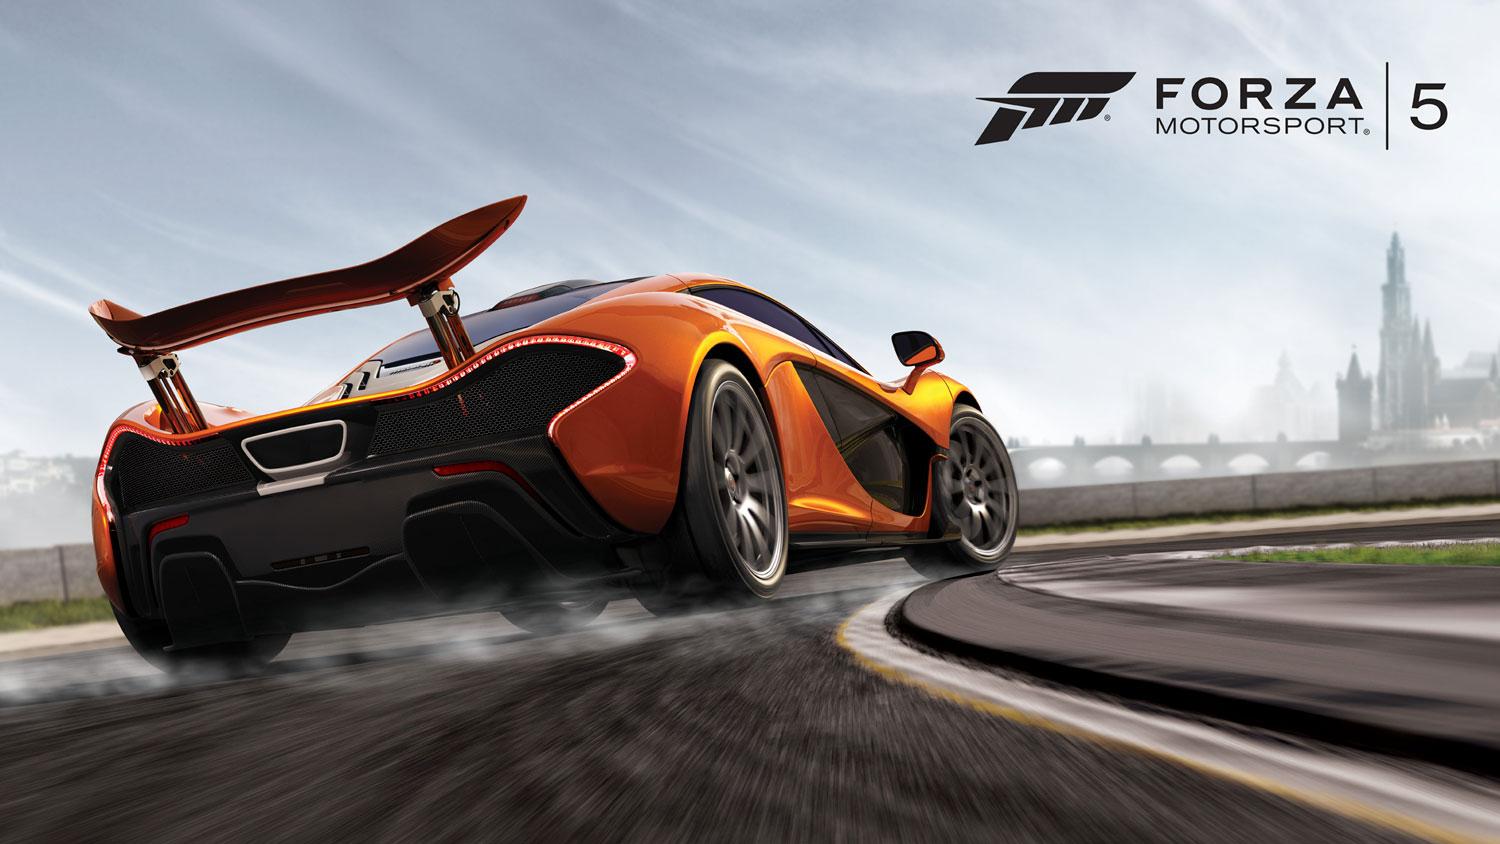 Hoping to play Forza Motorsport on the Steam Deck? All signs